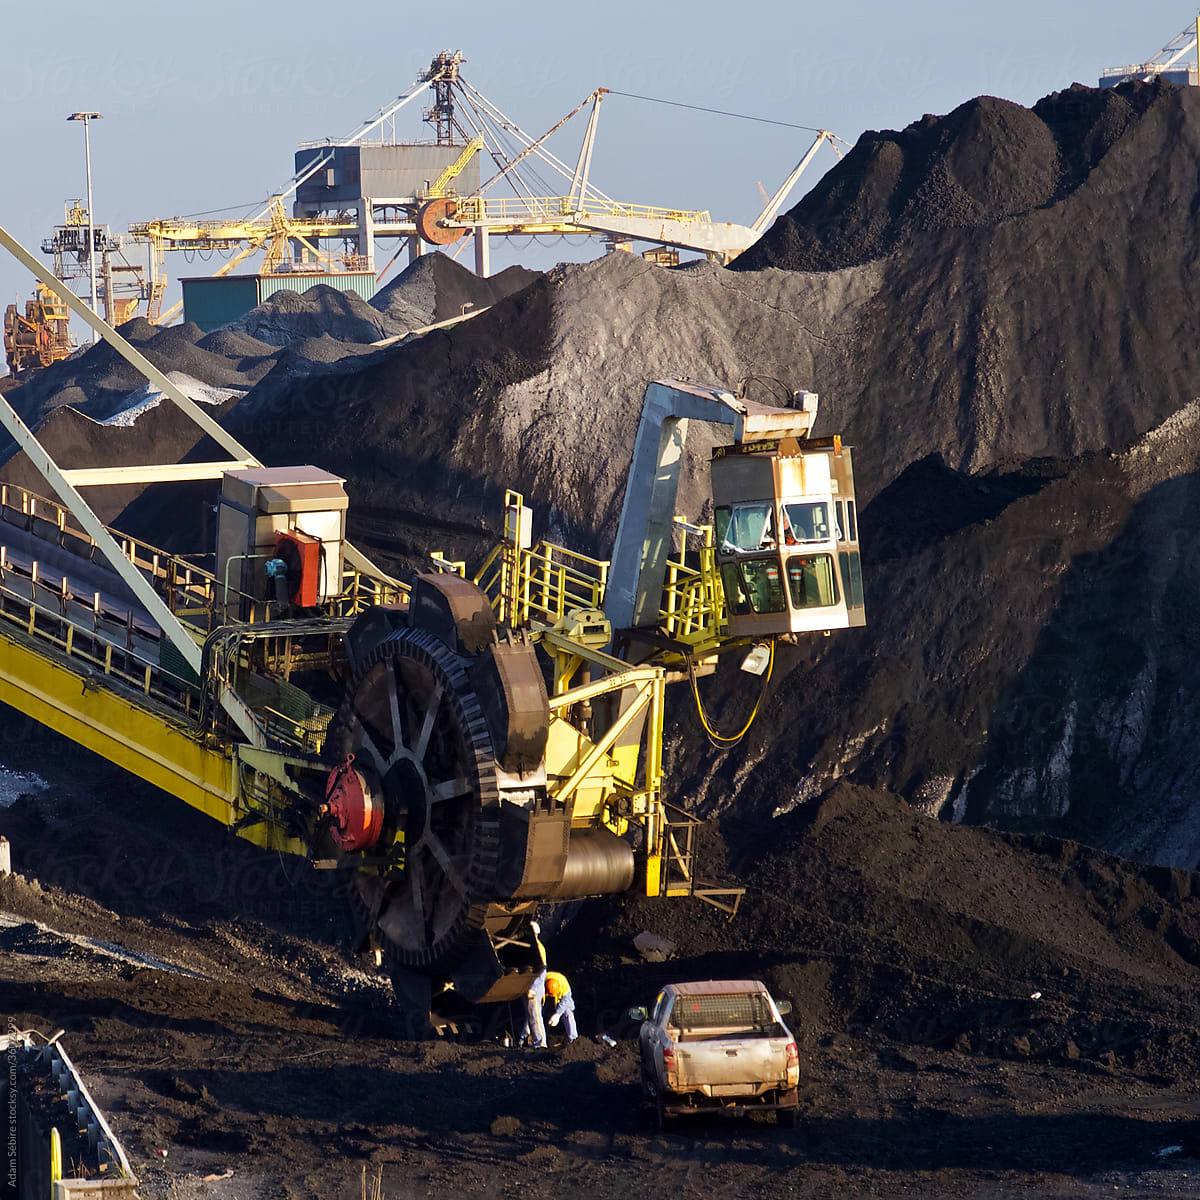 Men repairing massive coal mining machinery to dig up fossil fuels for carbon economy